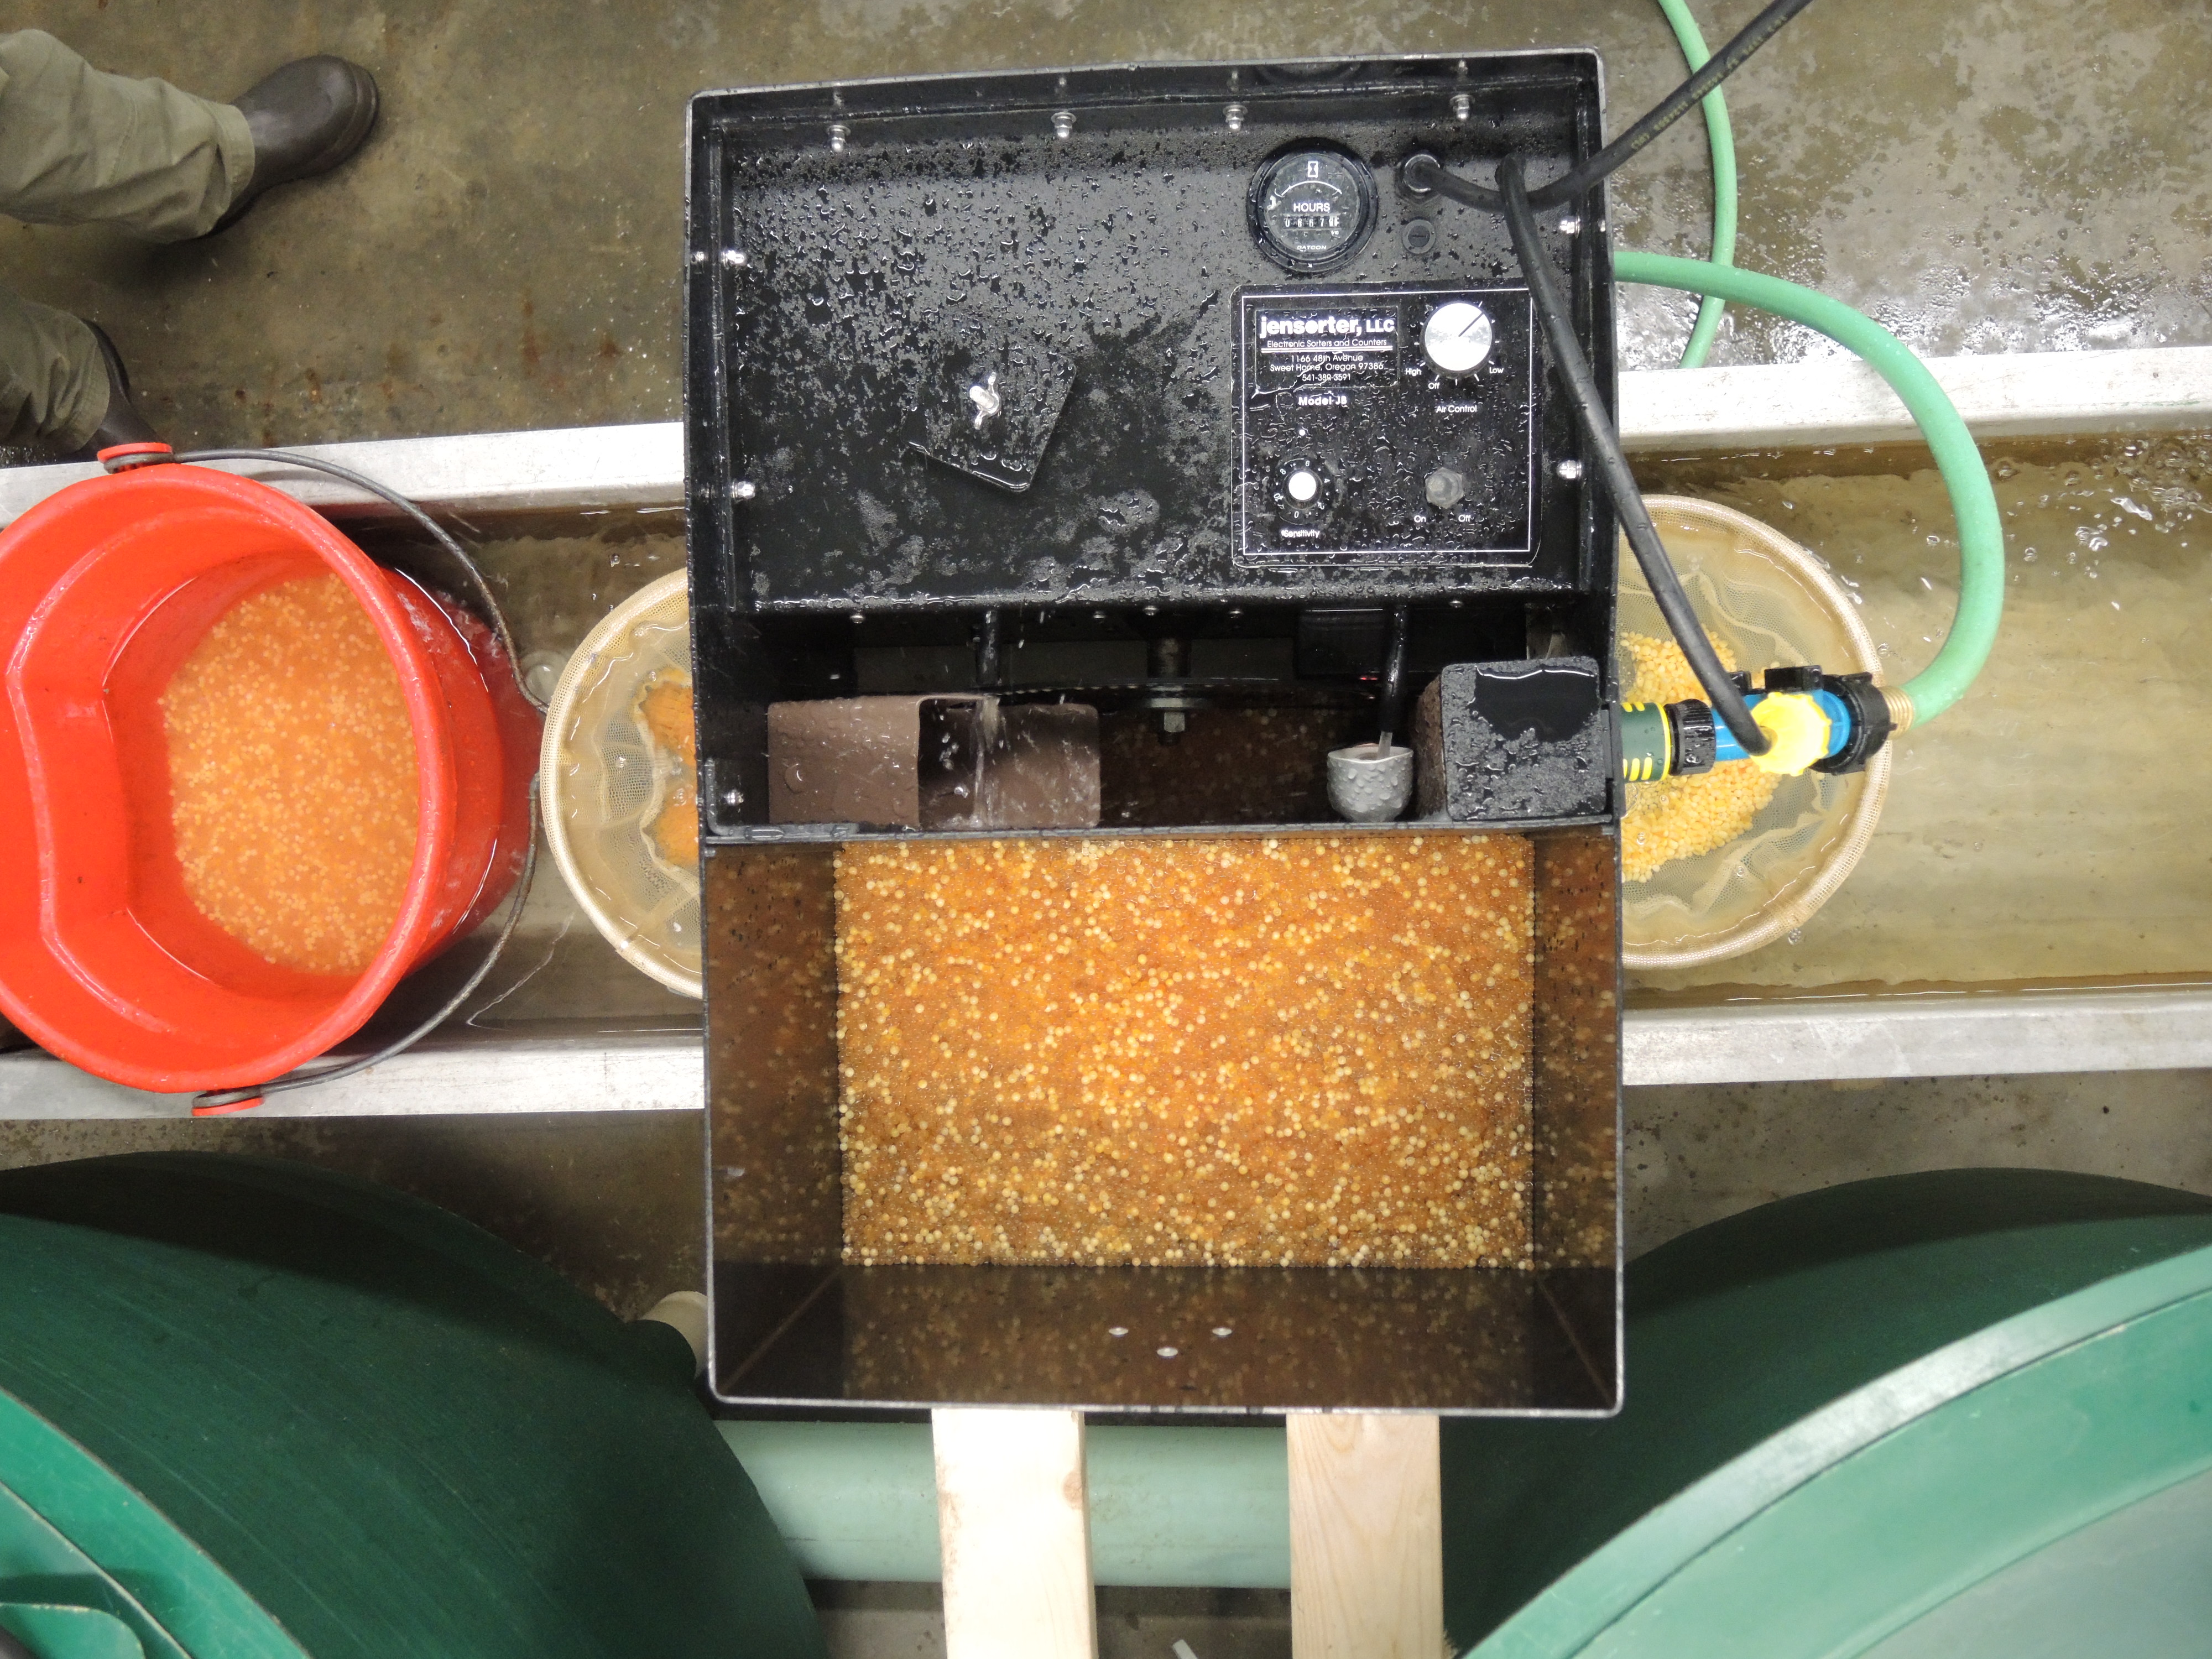 The hatchery version of the Egg-dicator. All eggs are deposited into the bin, sorted by an electric eye, then deposited into a "good" container and a "trash" container.